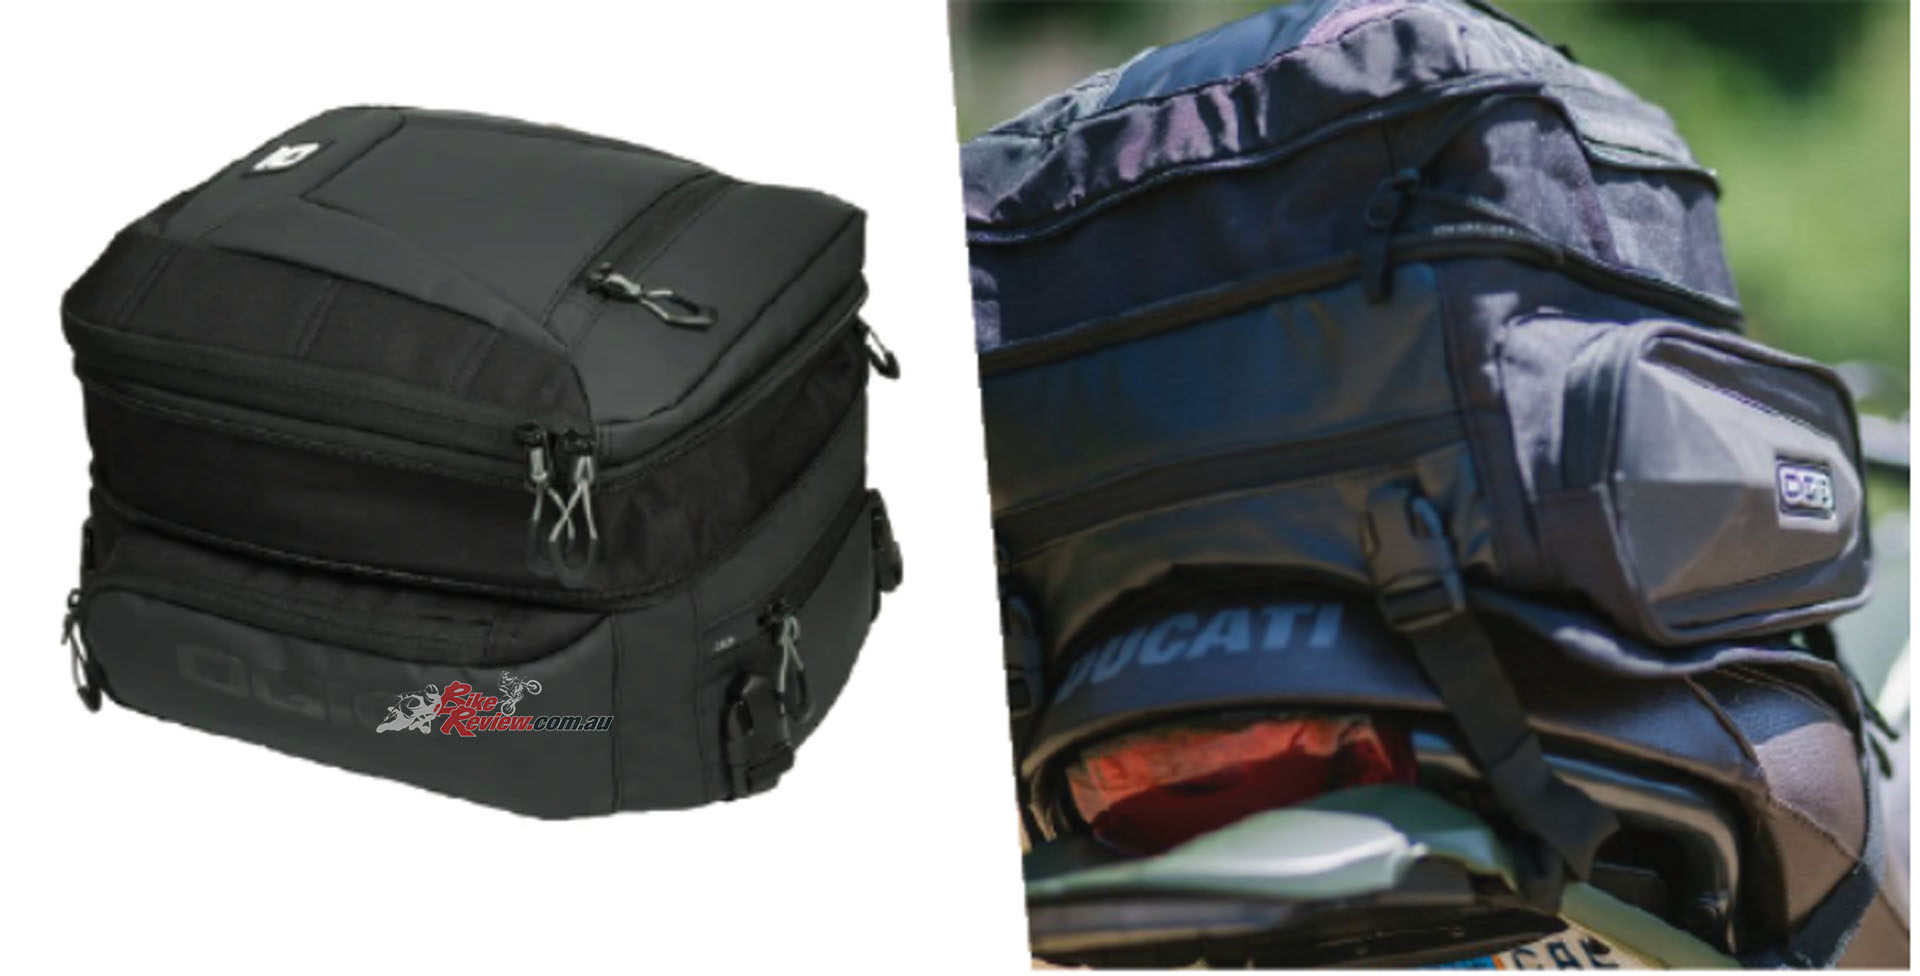 You can pick up the Tail Bag 2.0 for an RRP of just $169.95! Head to your local motorcycle store or contact Cassons regarding availability. 